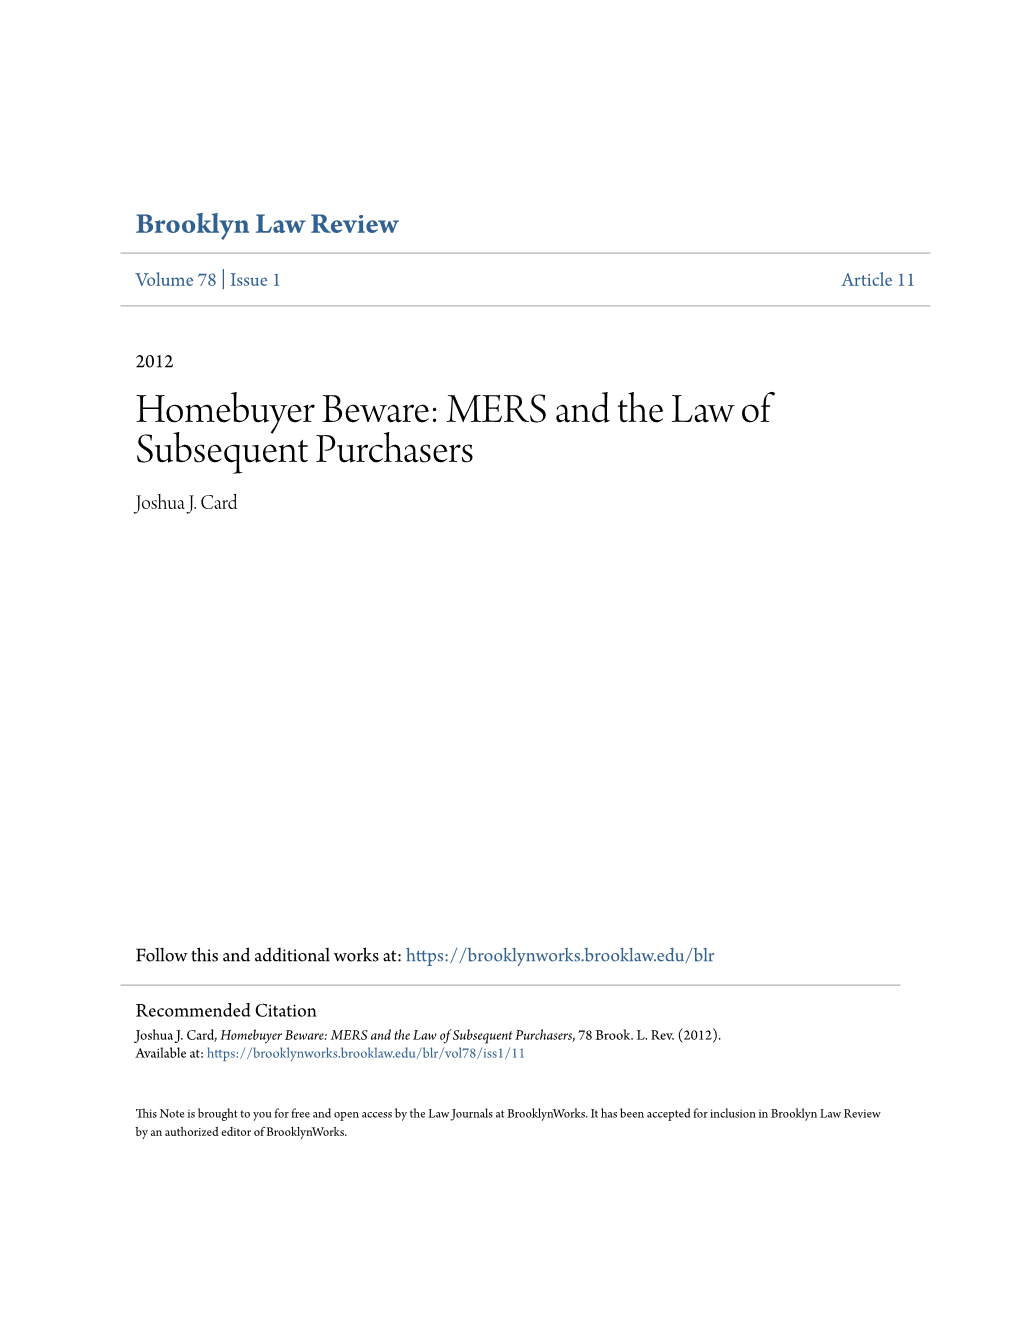 MERS and the Law of Subsequent Purchasers Joshua J